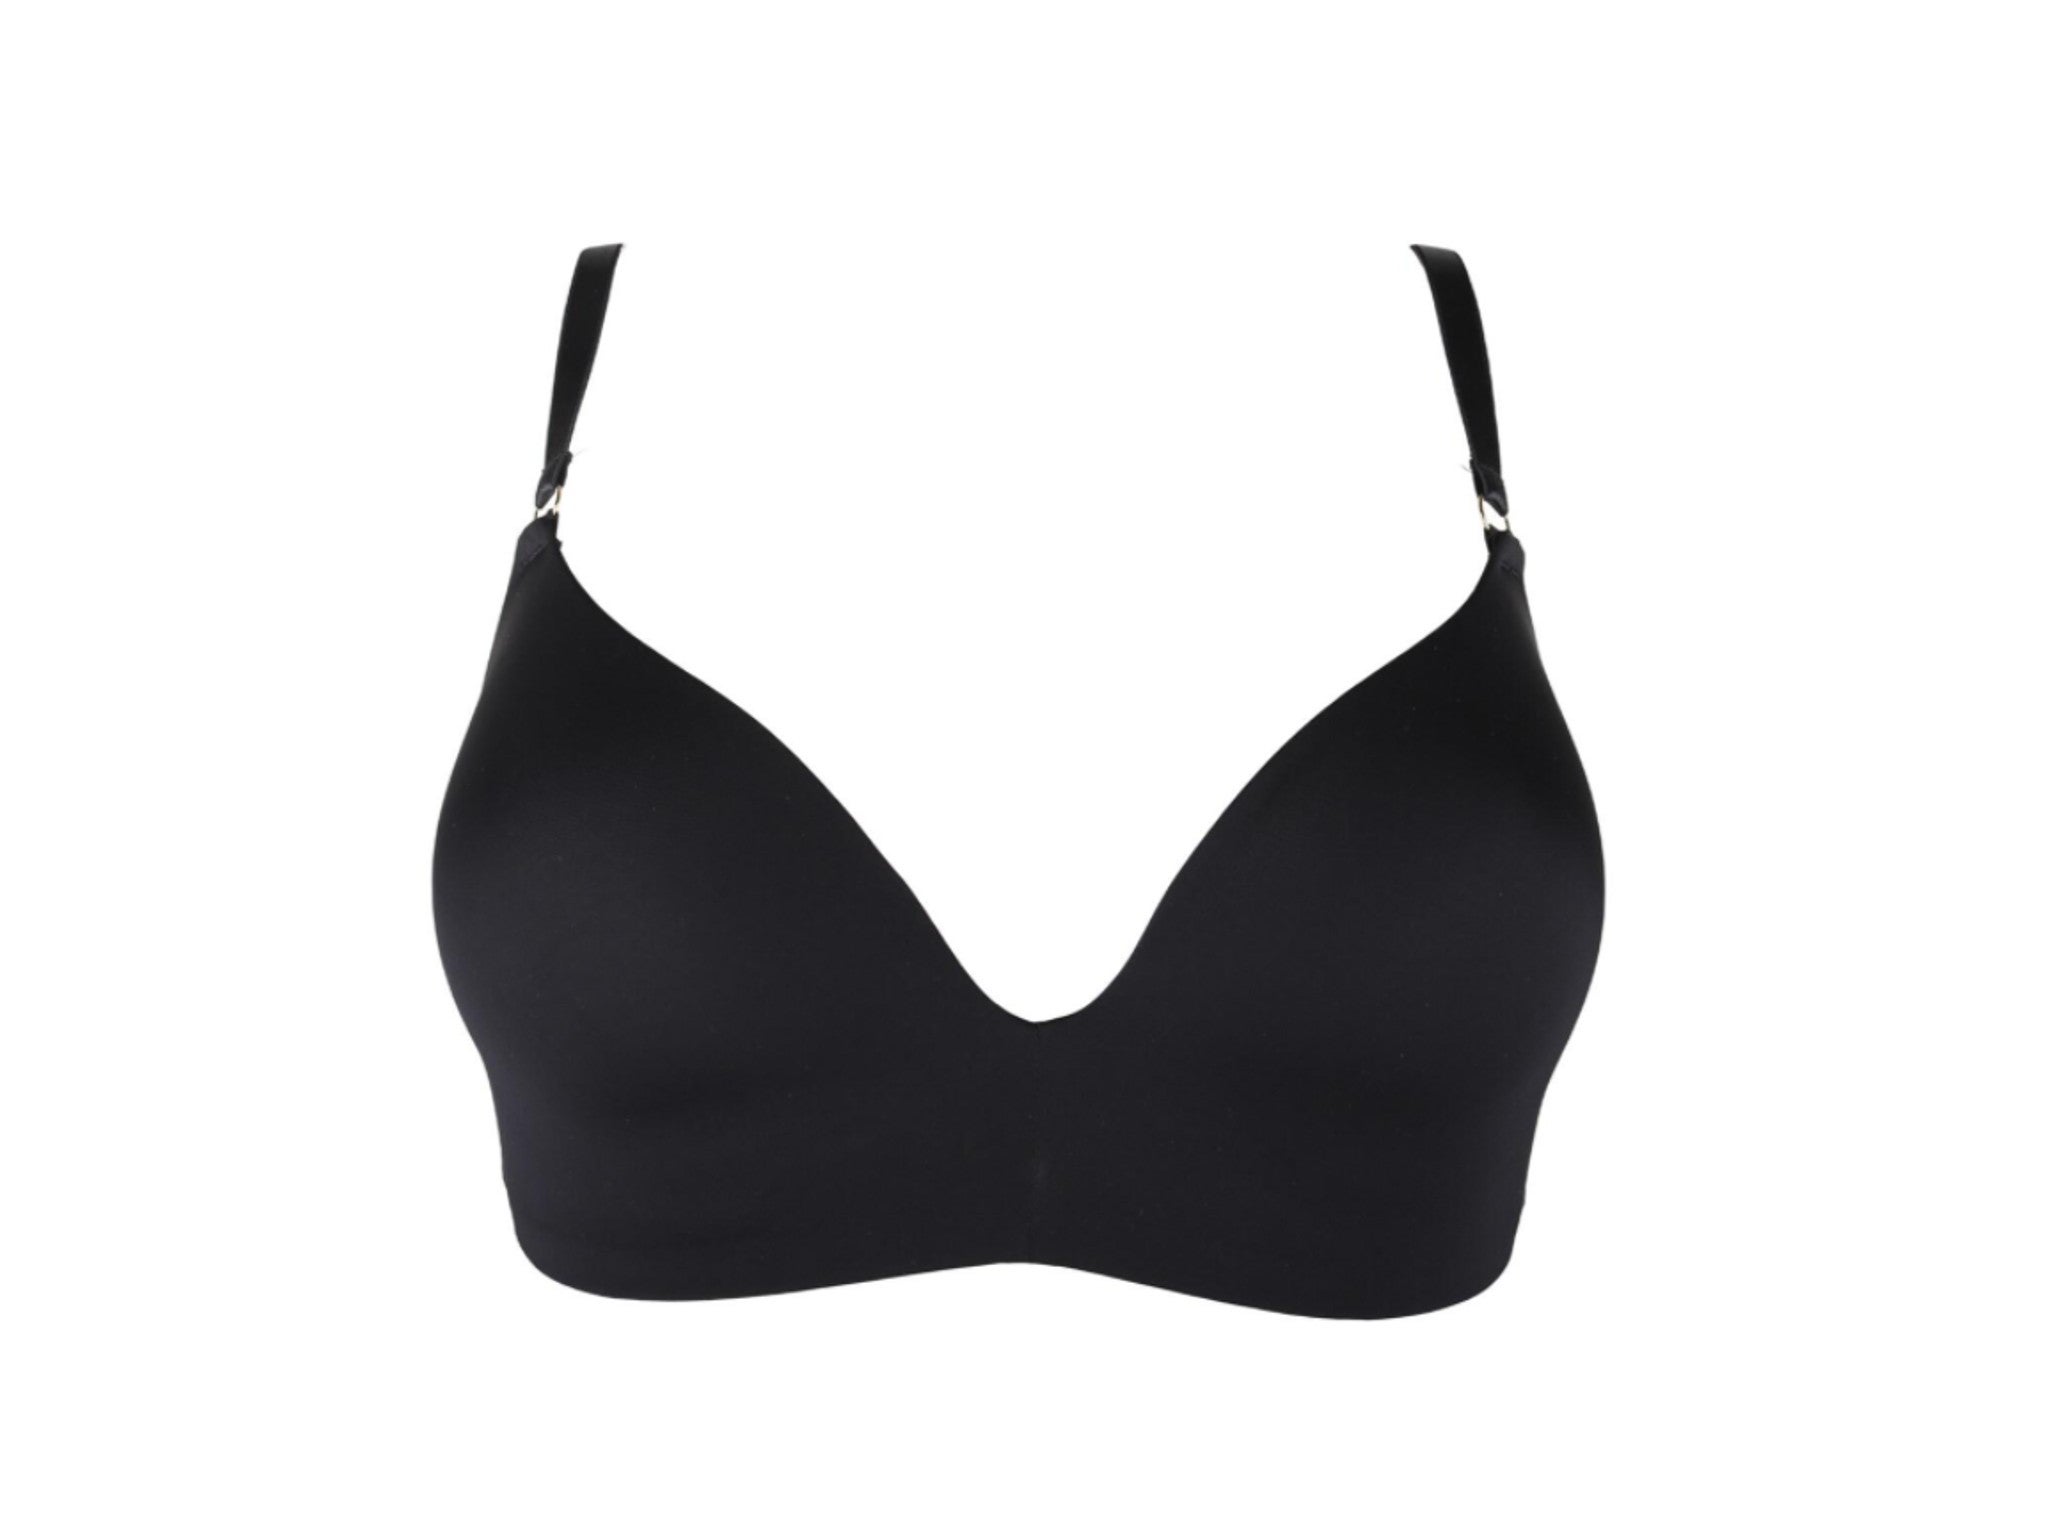 Soft, non-wired bra with padded cups - black, Bras